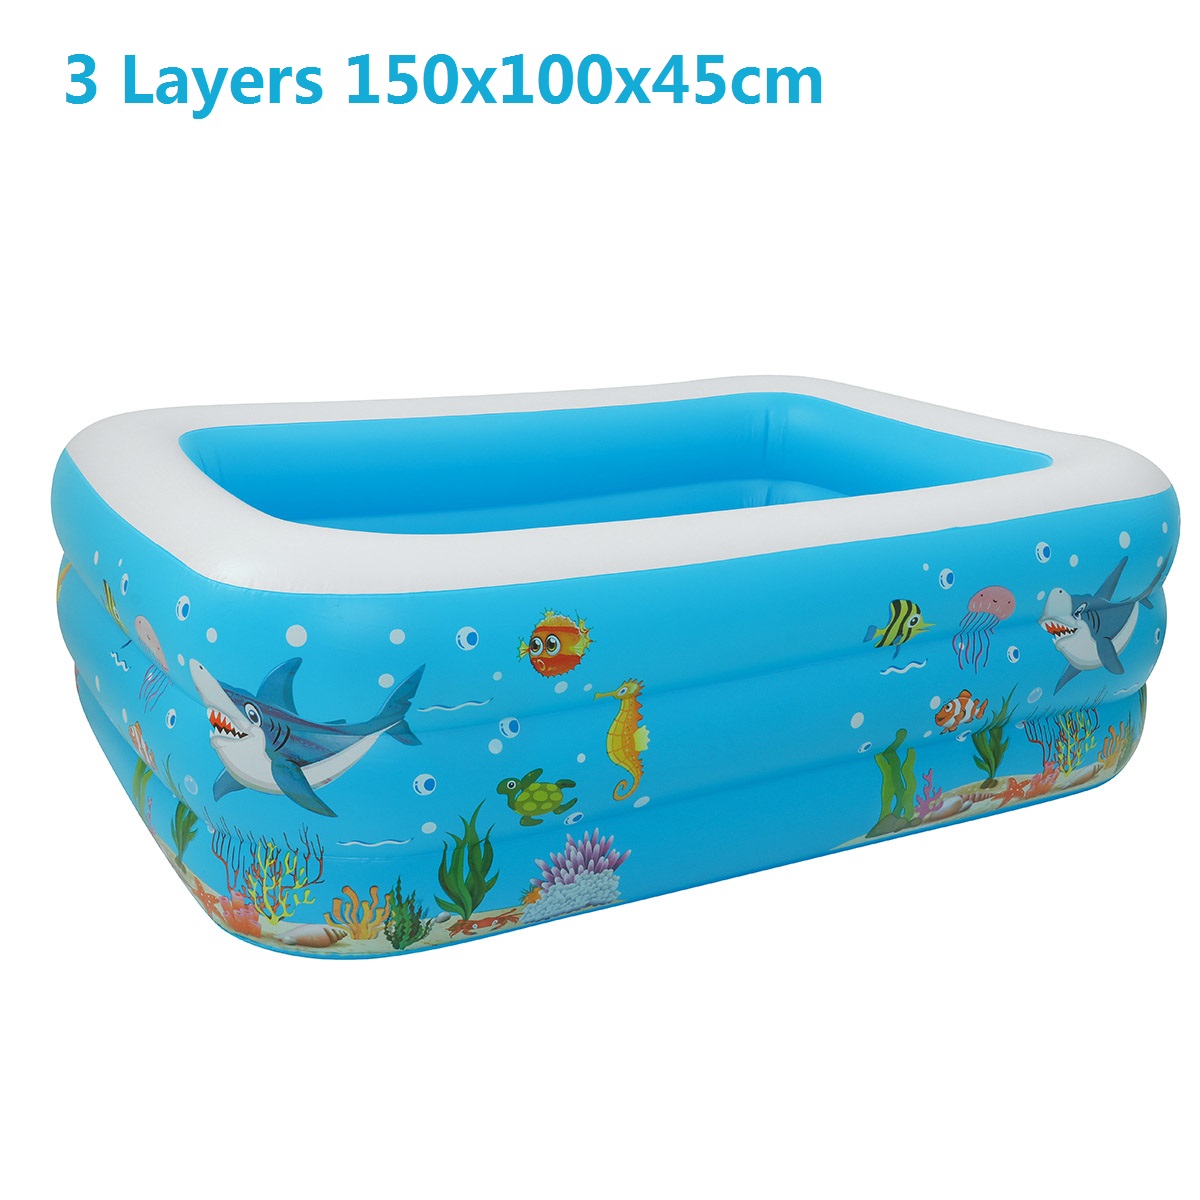 120-150CM-Family-Inflatable-Swimming-Pool-3-Ring-Thicken-Summer-Backyard-Inflate-Bathtub-for-Kids-Ad-1696845-14